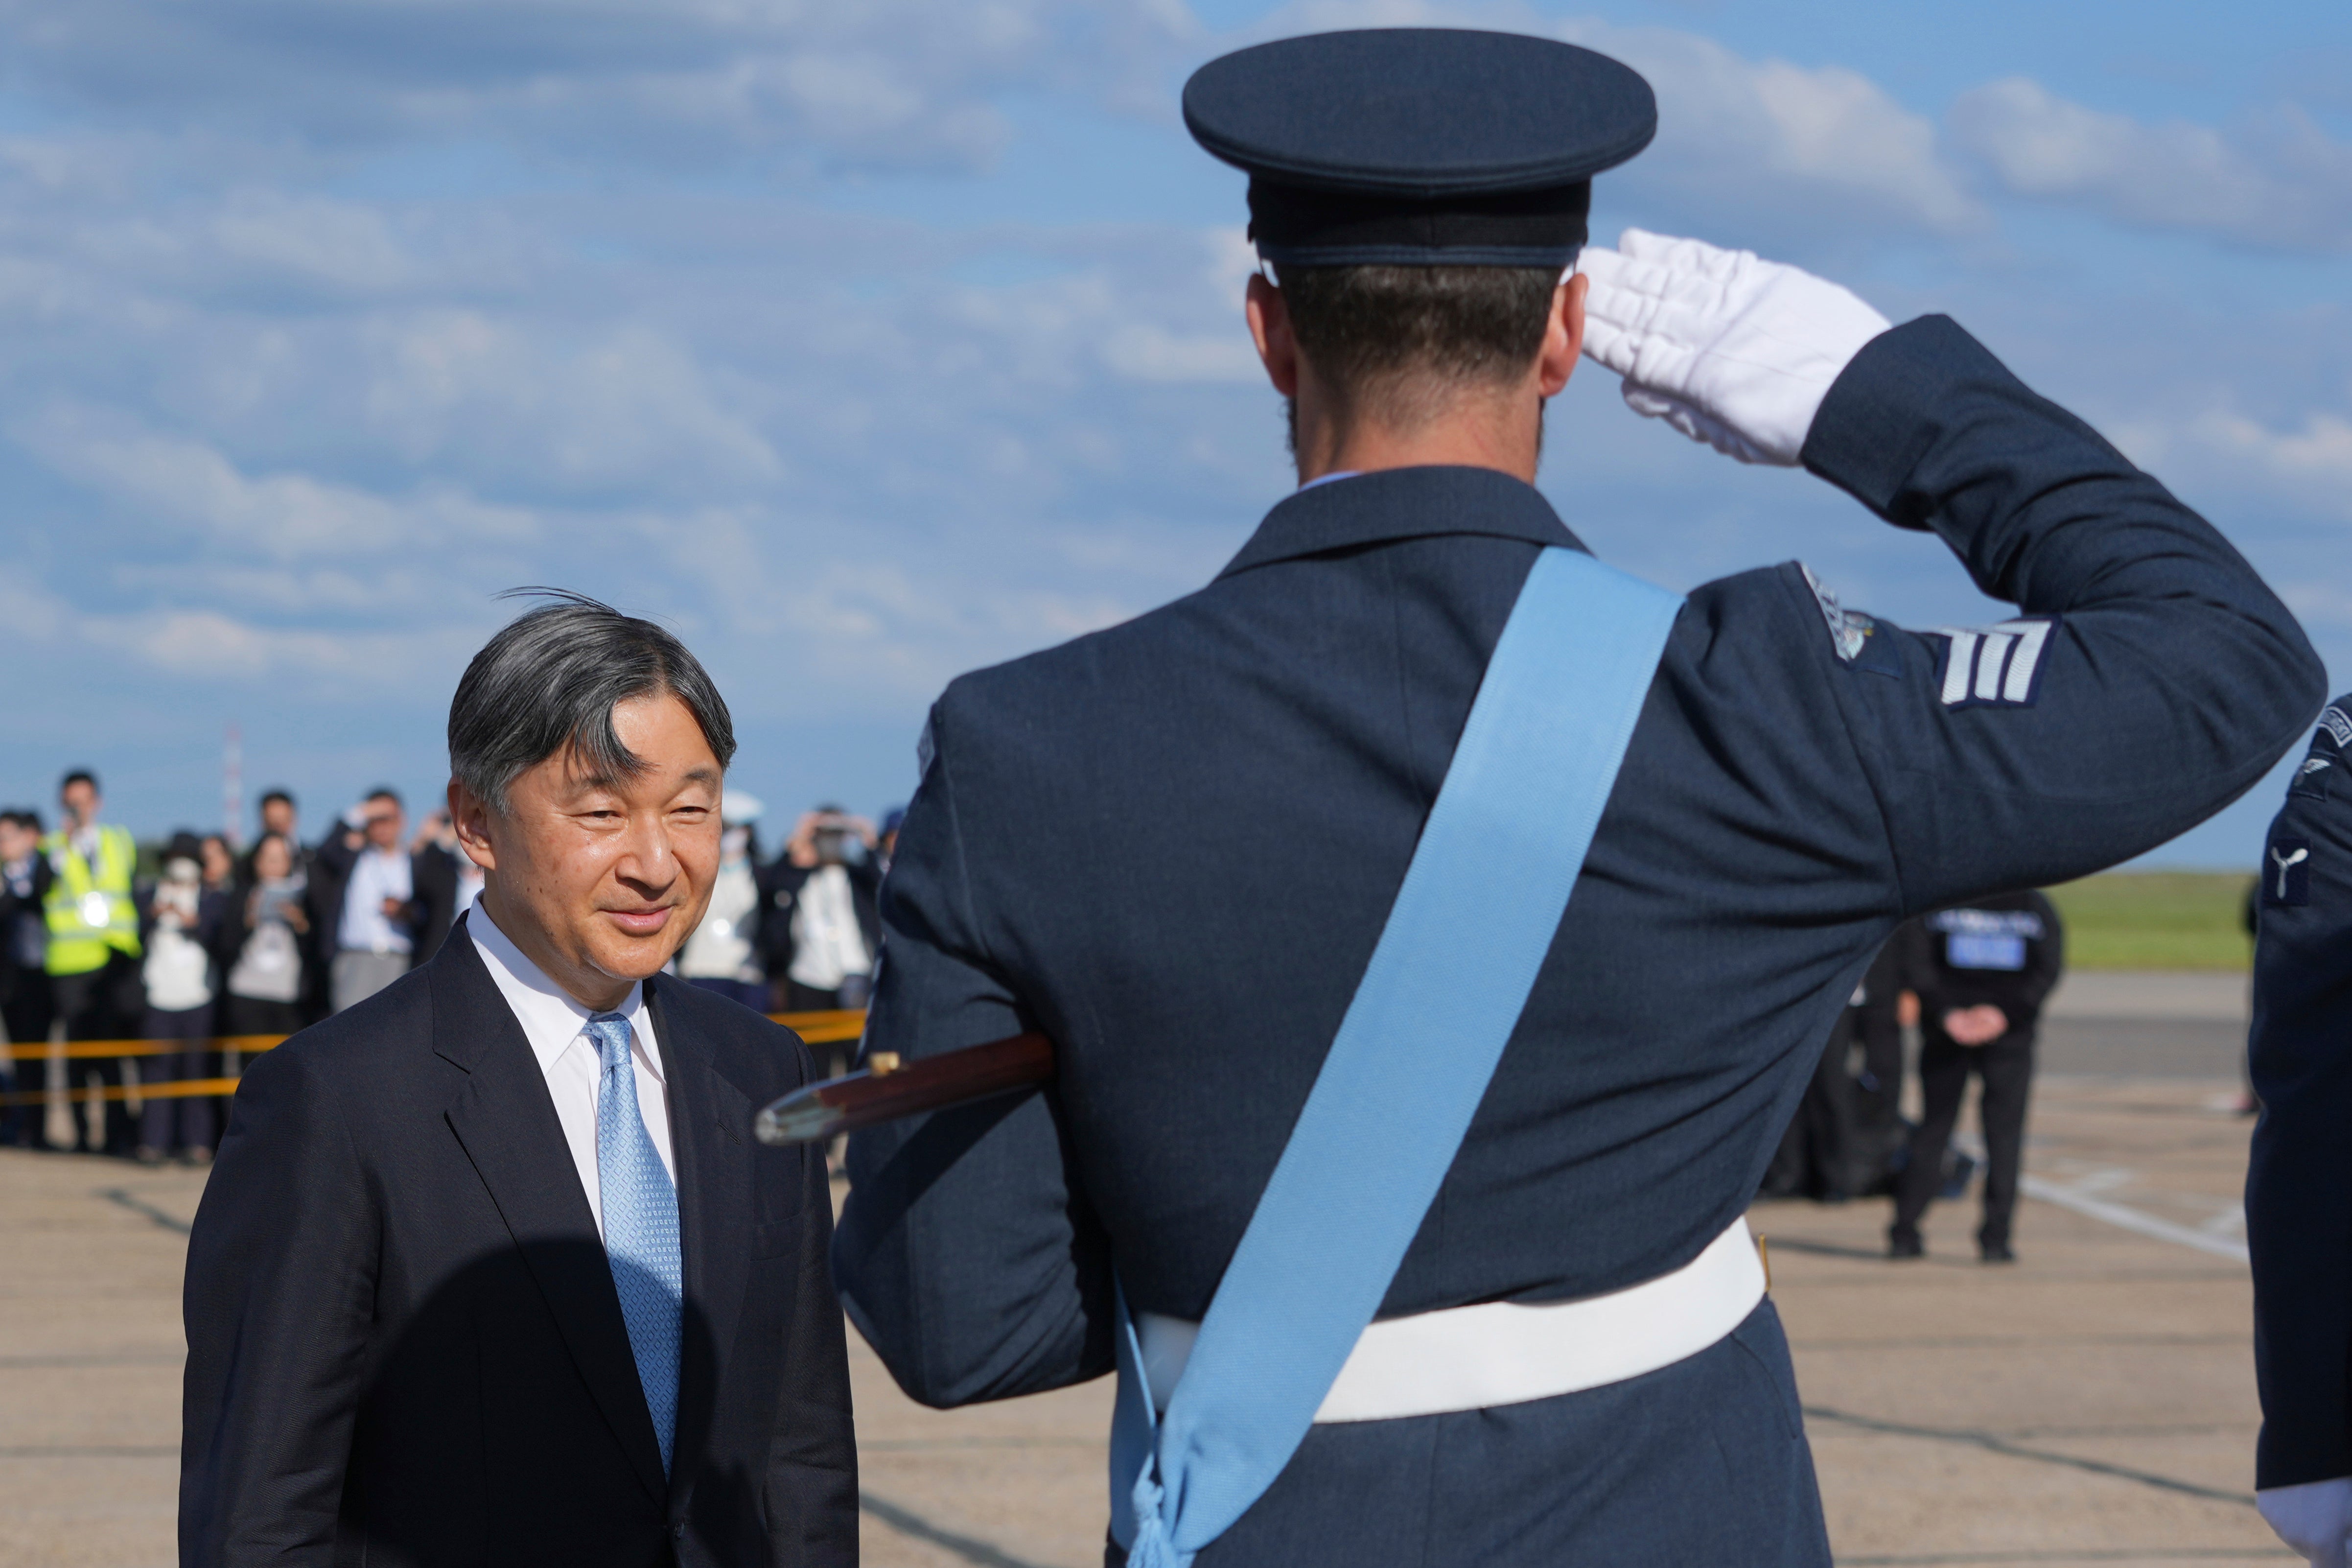 Emperor Naruhito is saluted by a member of the honour guard as he and Empress Masako arrive at Stansted Airport, England